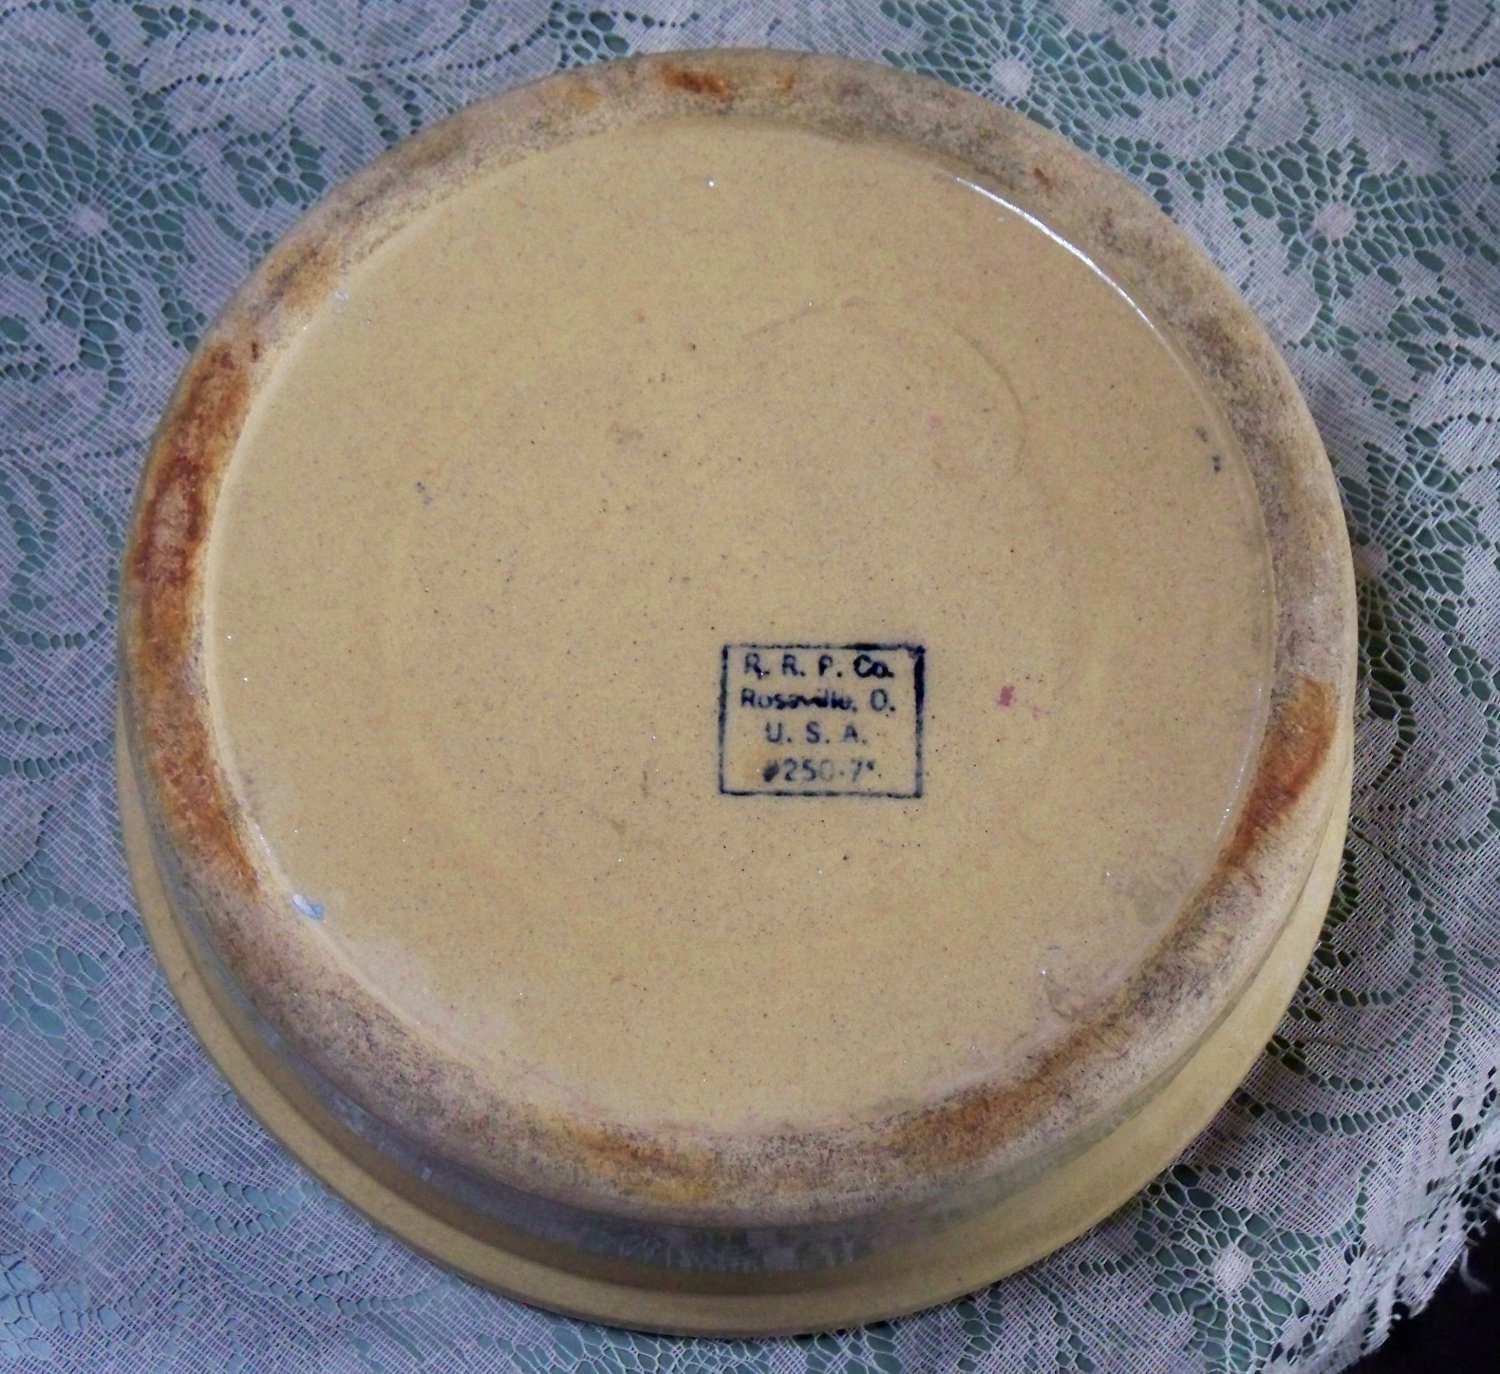 R.R.P. Co. Roseville O. U.S.A. #250-7" bowl grinding bowl pottery stoneware